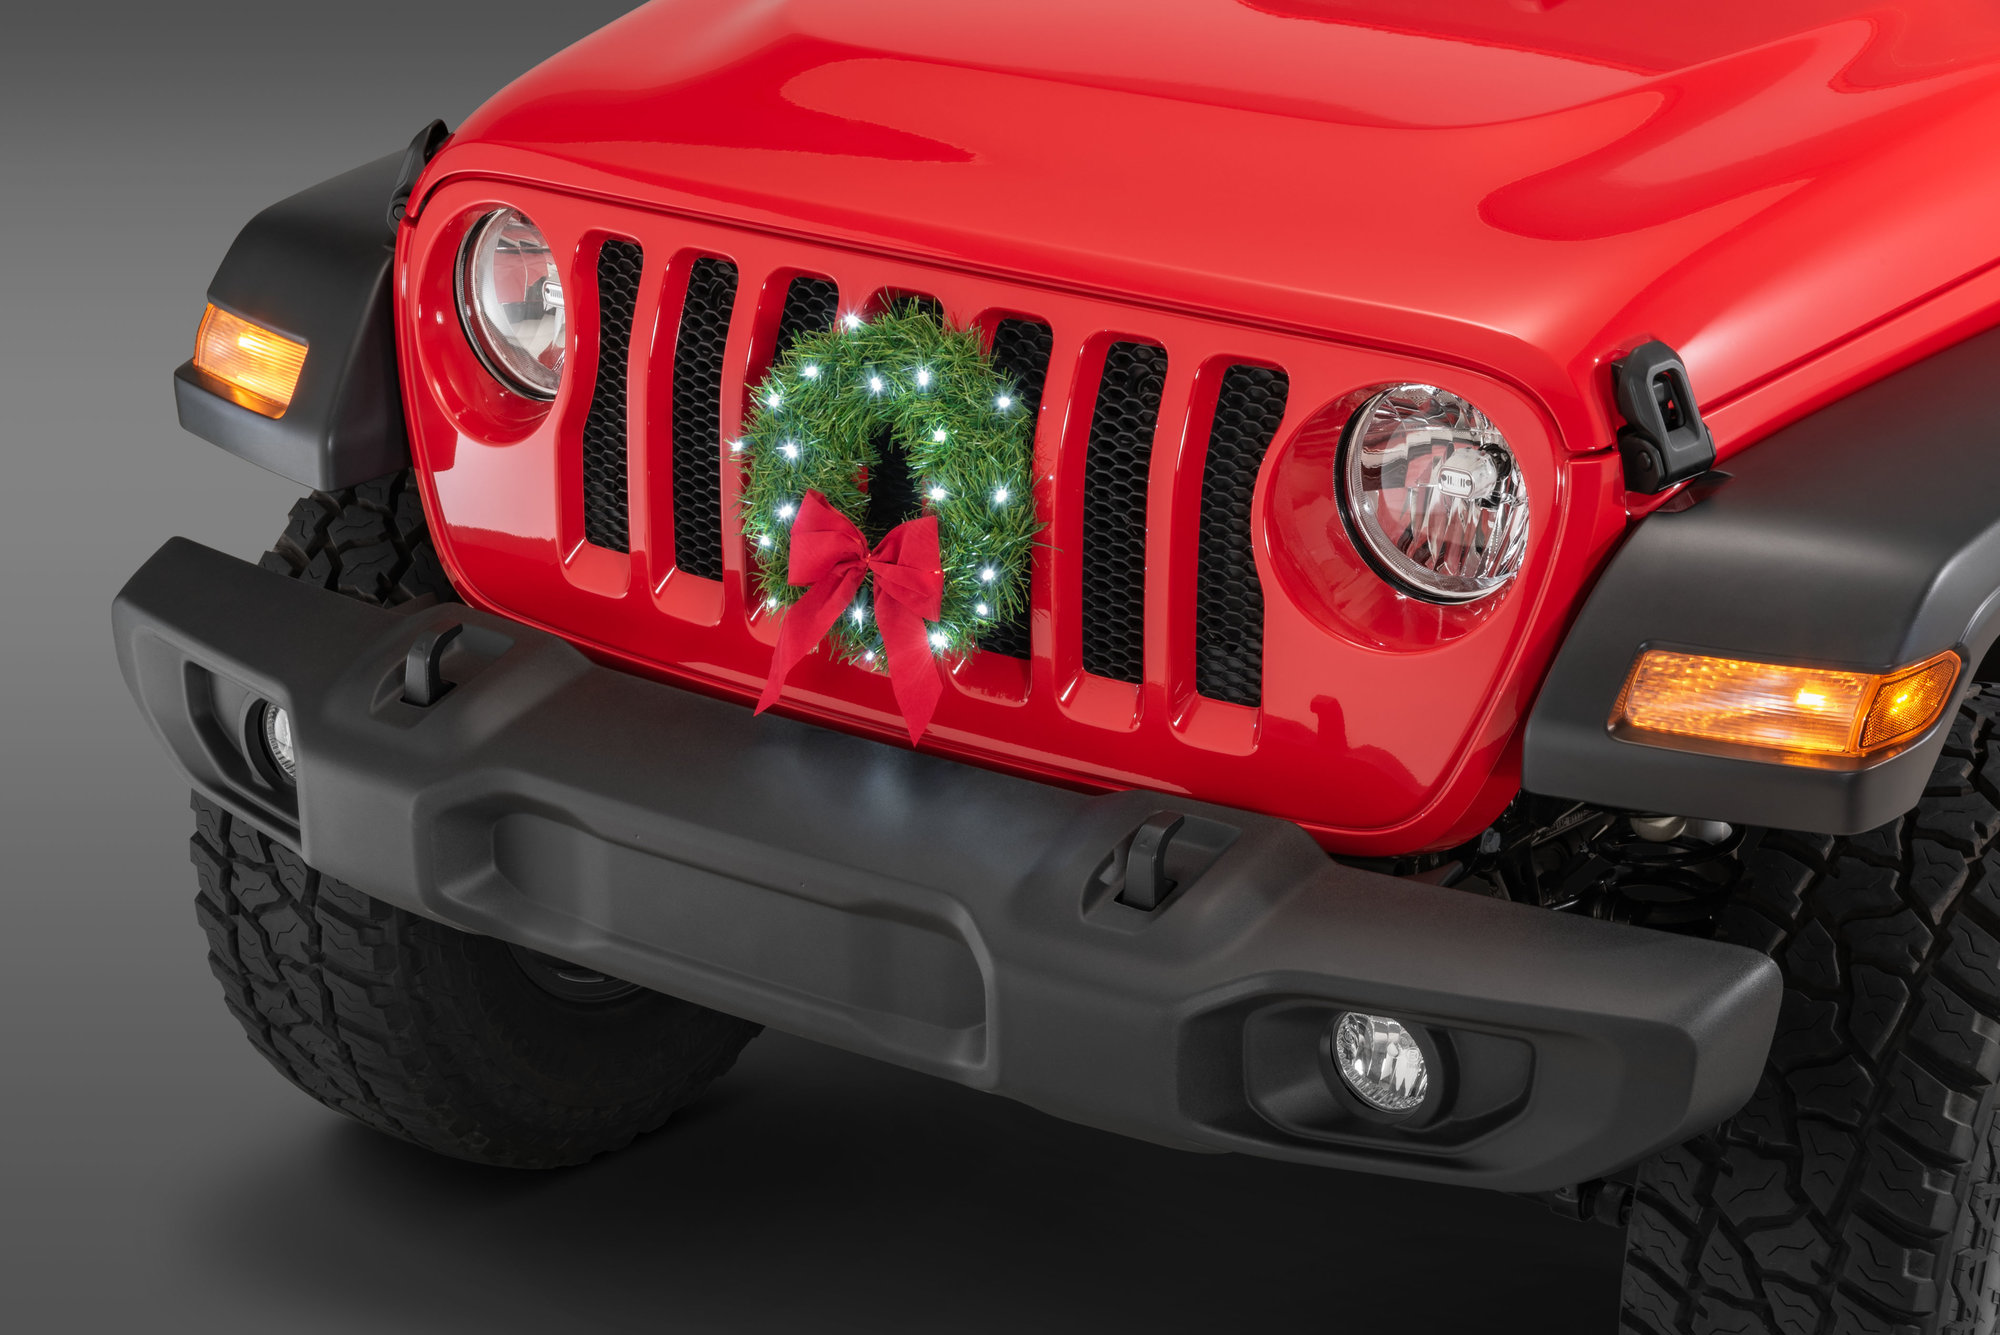 Best Jeep Gifts To Fit Any Budget | Quadratec